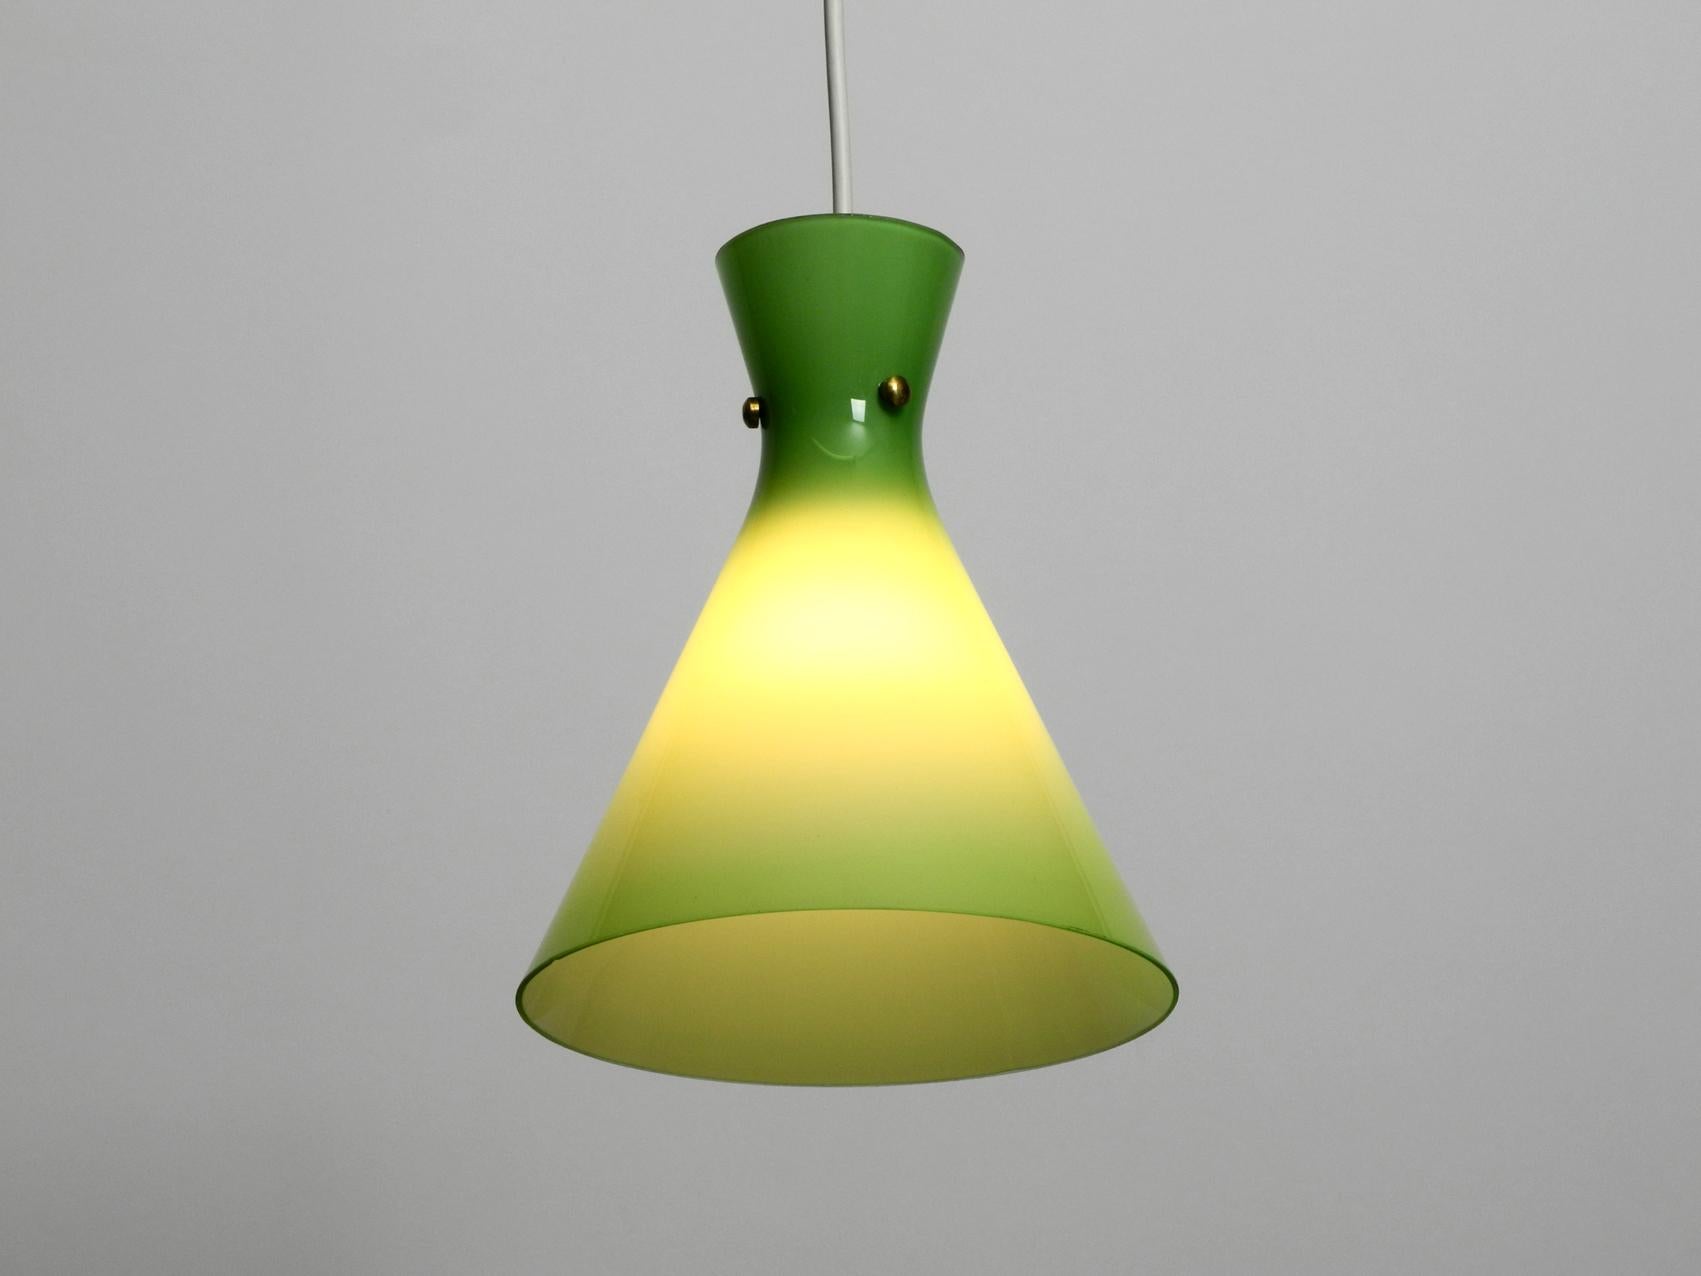 Very beautiful midcentury overglass Diabolo pendant lamp. Made in Austria.
The glass is outside light green and inside white. Rare and elegant Mid-Century Modern. Opaline glass pendant lamp.
One E27 light bulb. The lamp is in a very good original